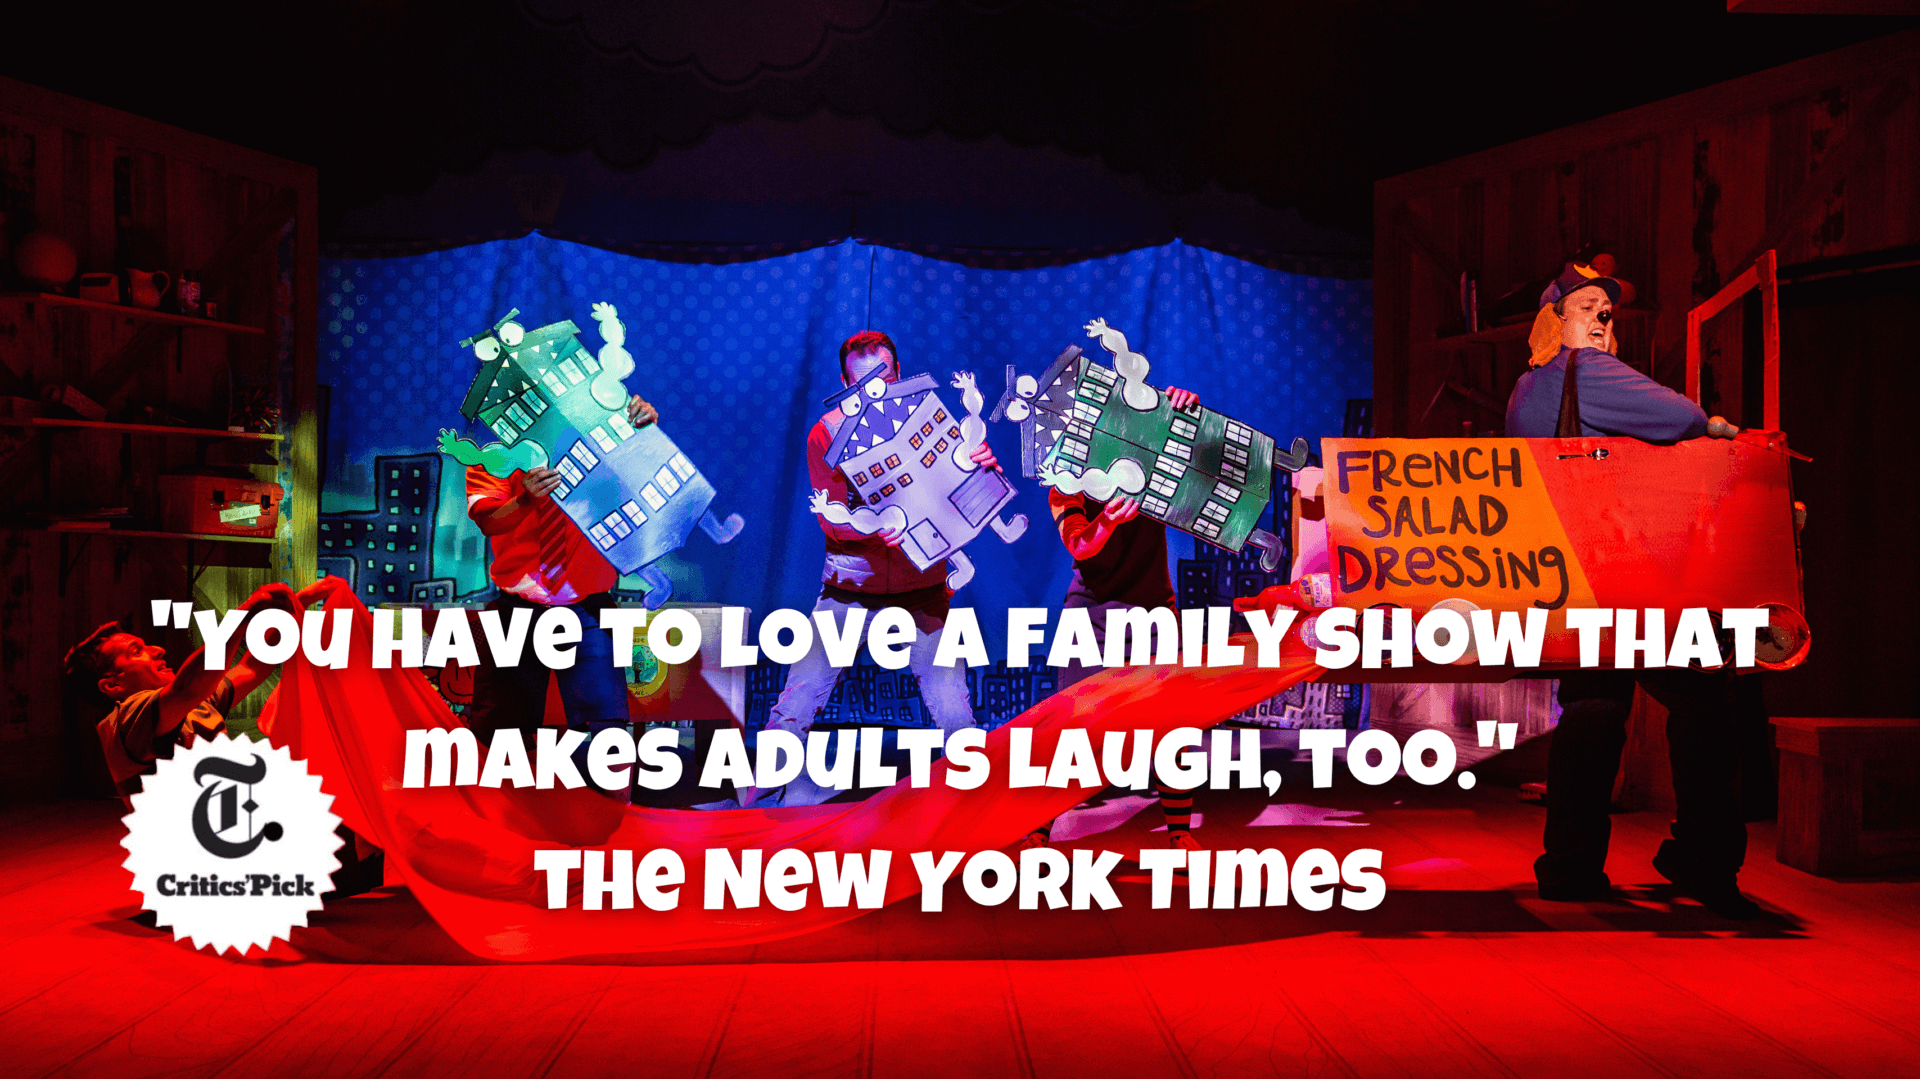 "You have to love a family show that makes adults laugh, too." The New York Times